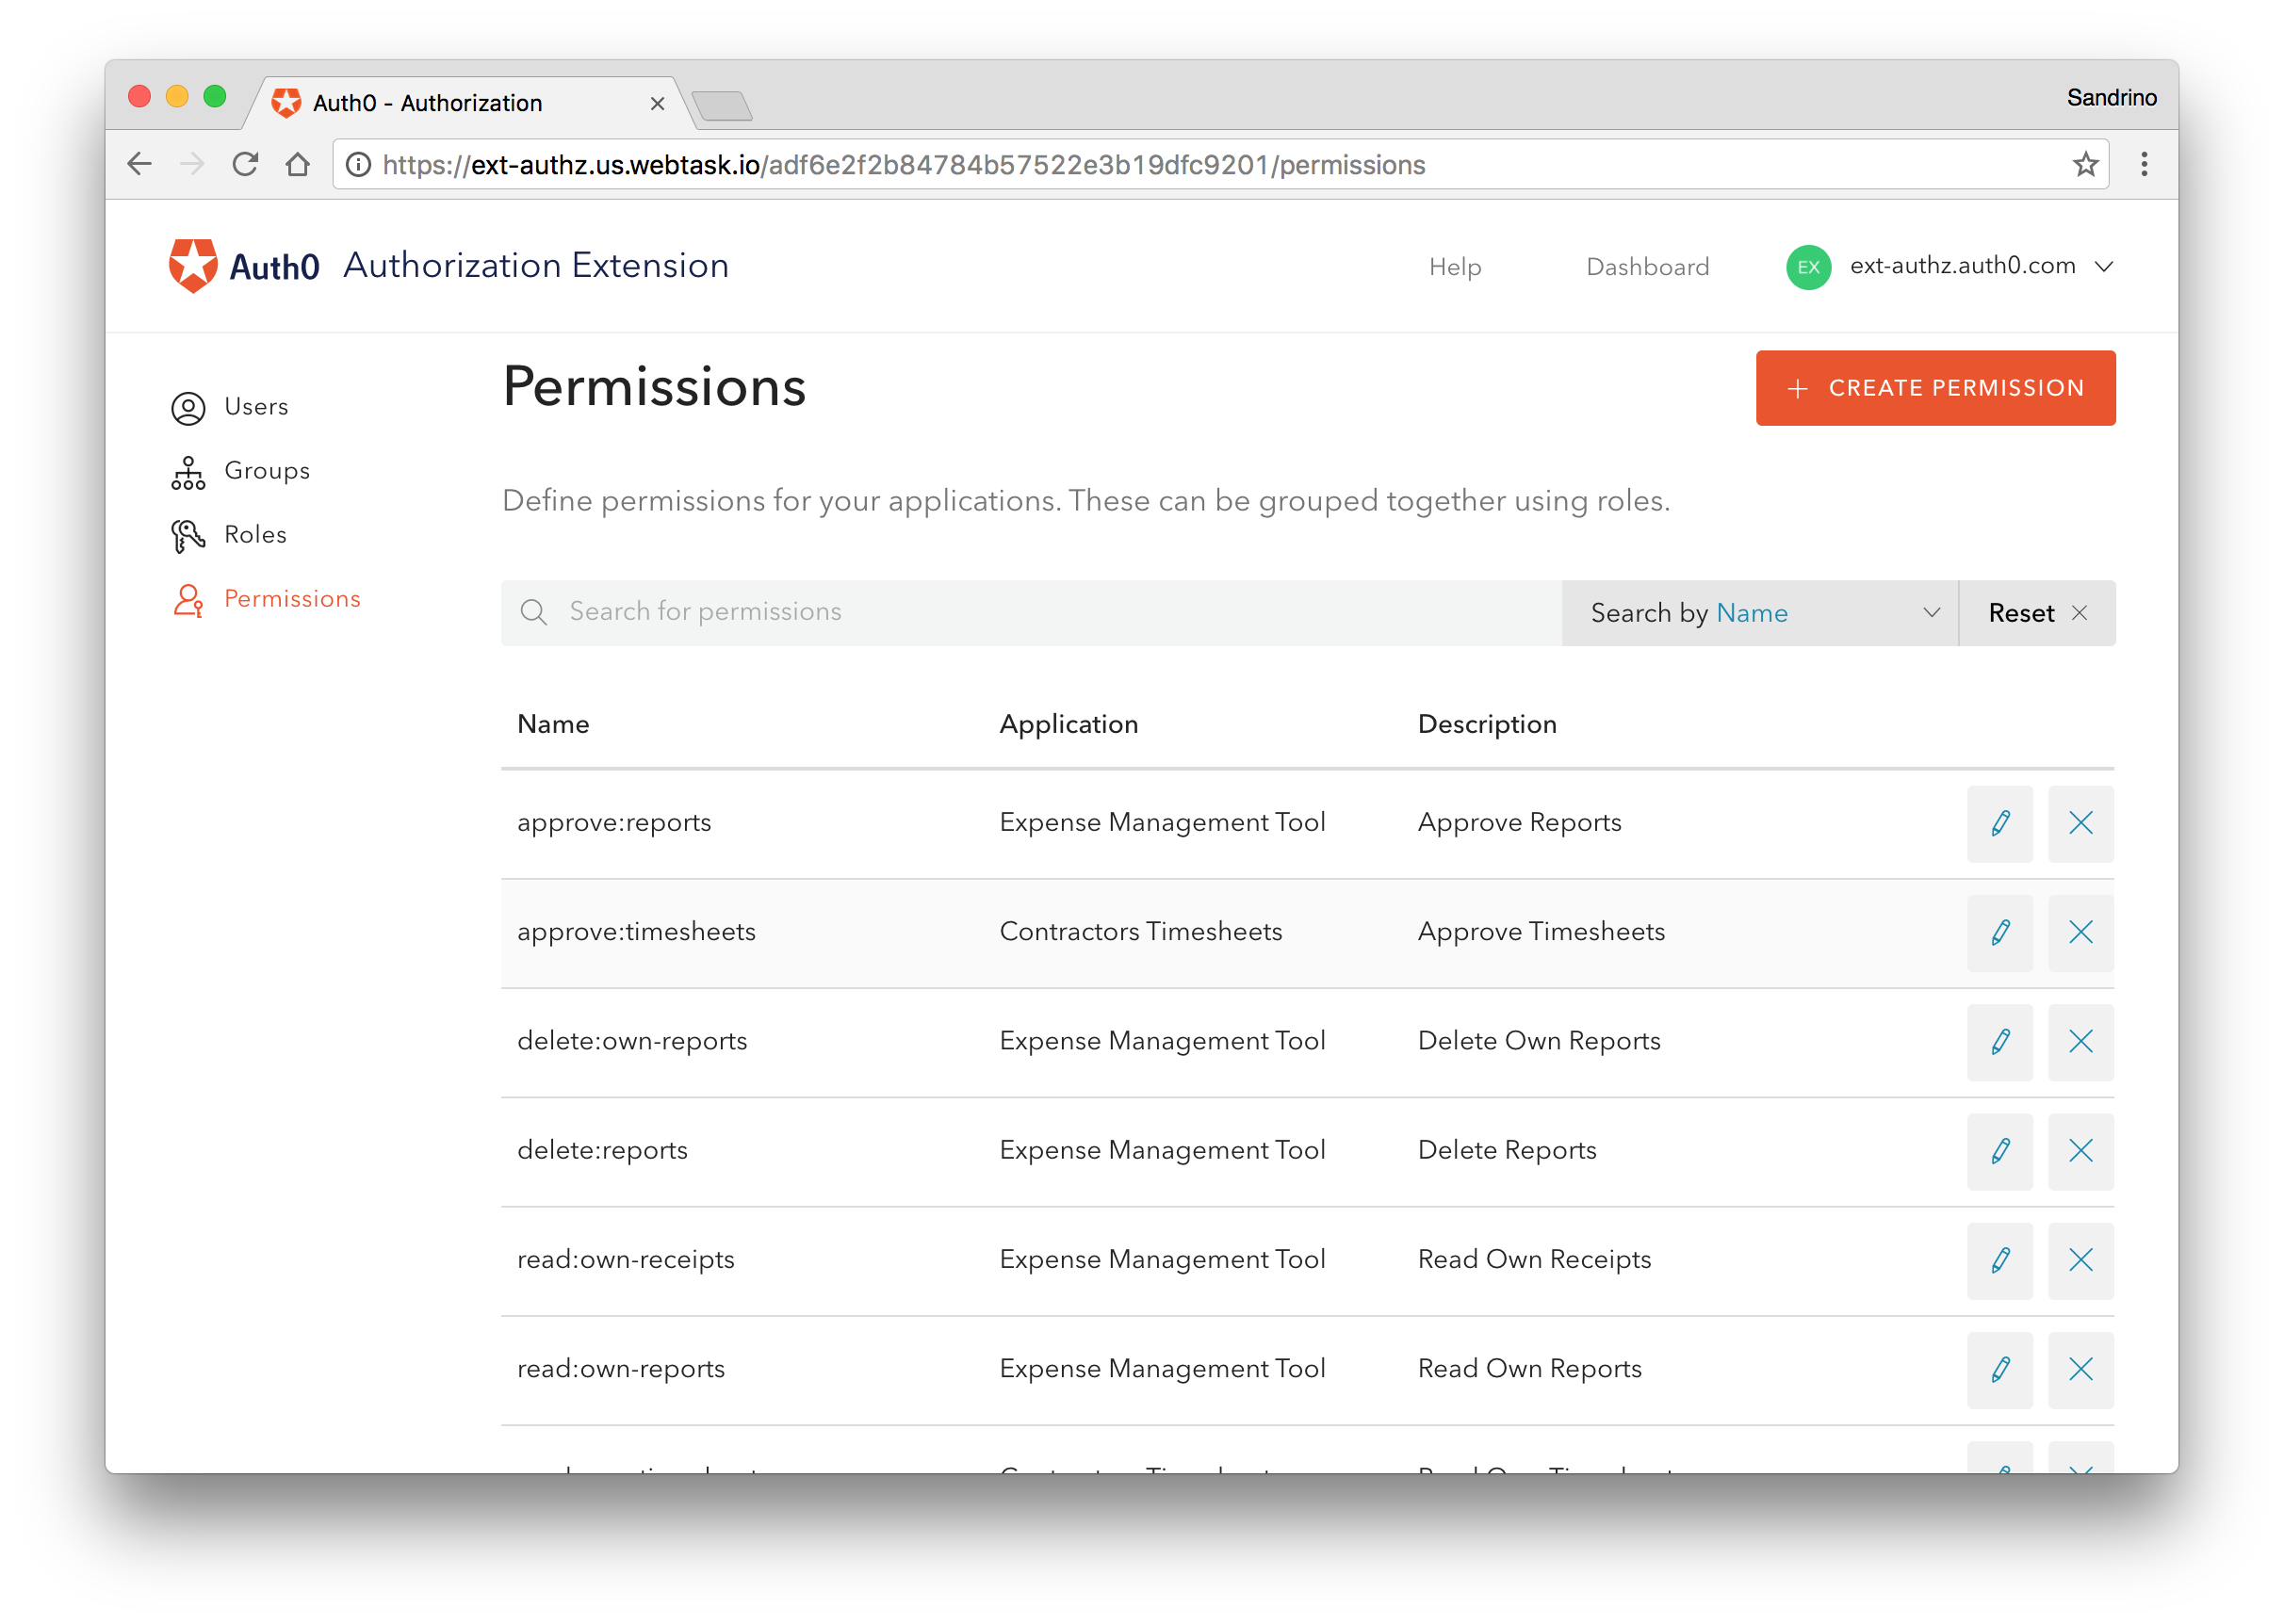 Define permissions for your application